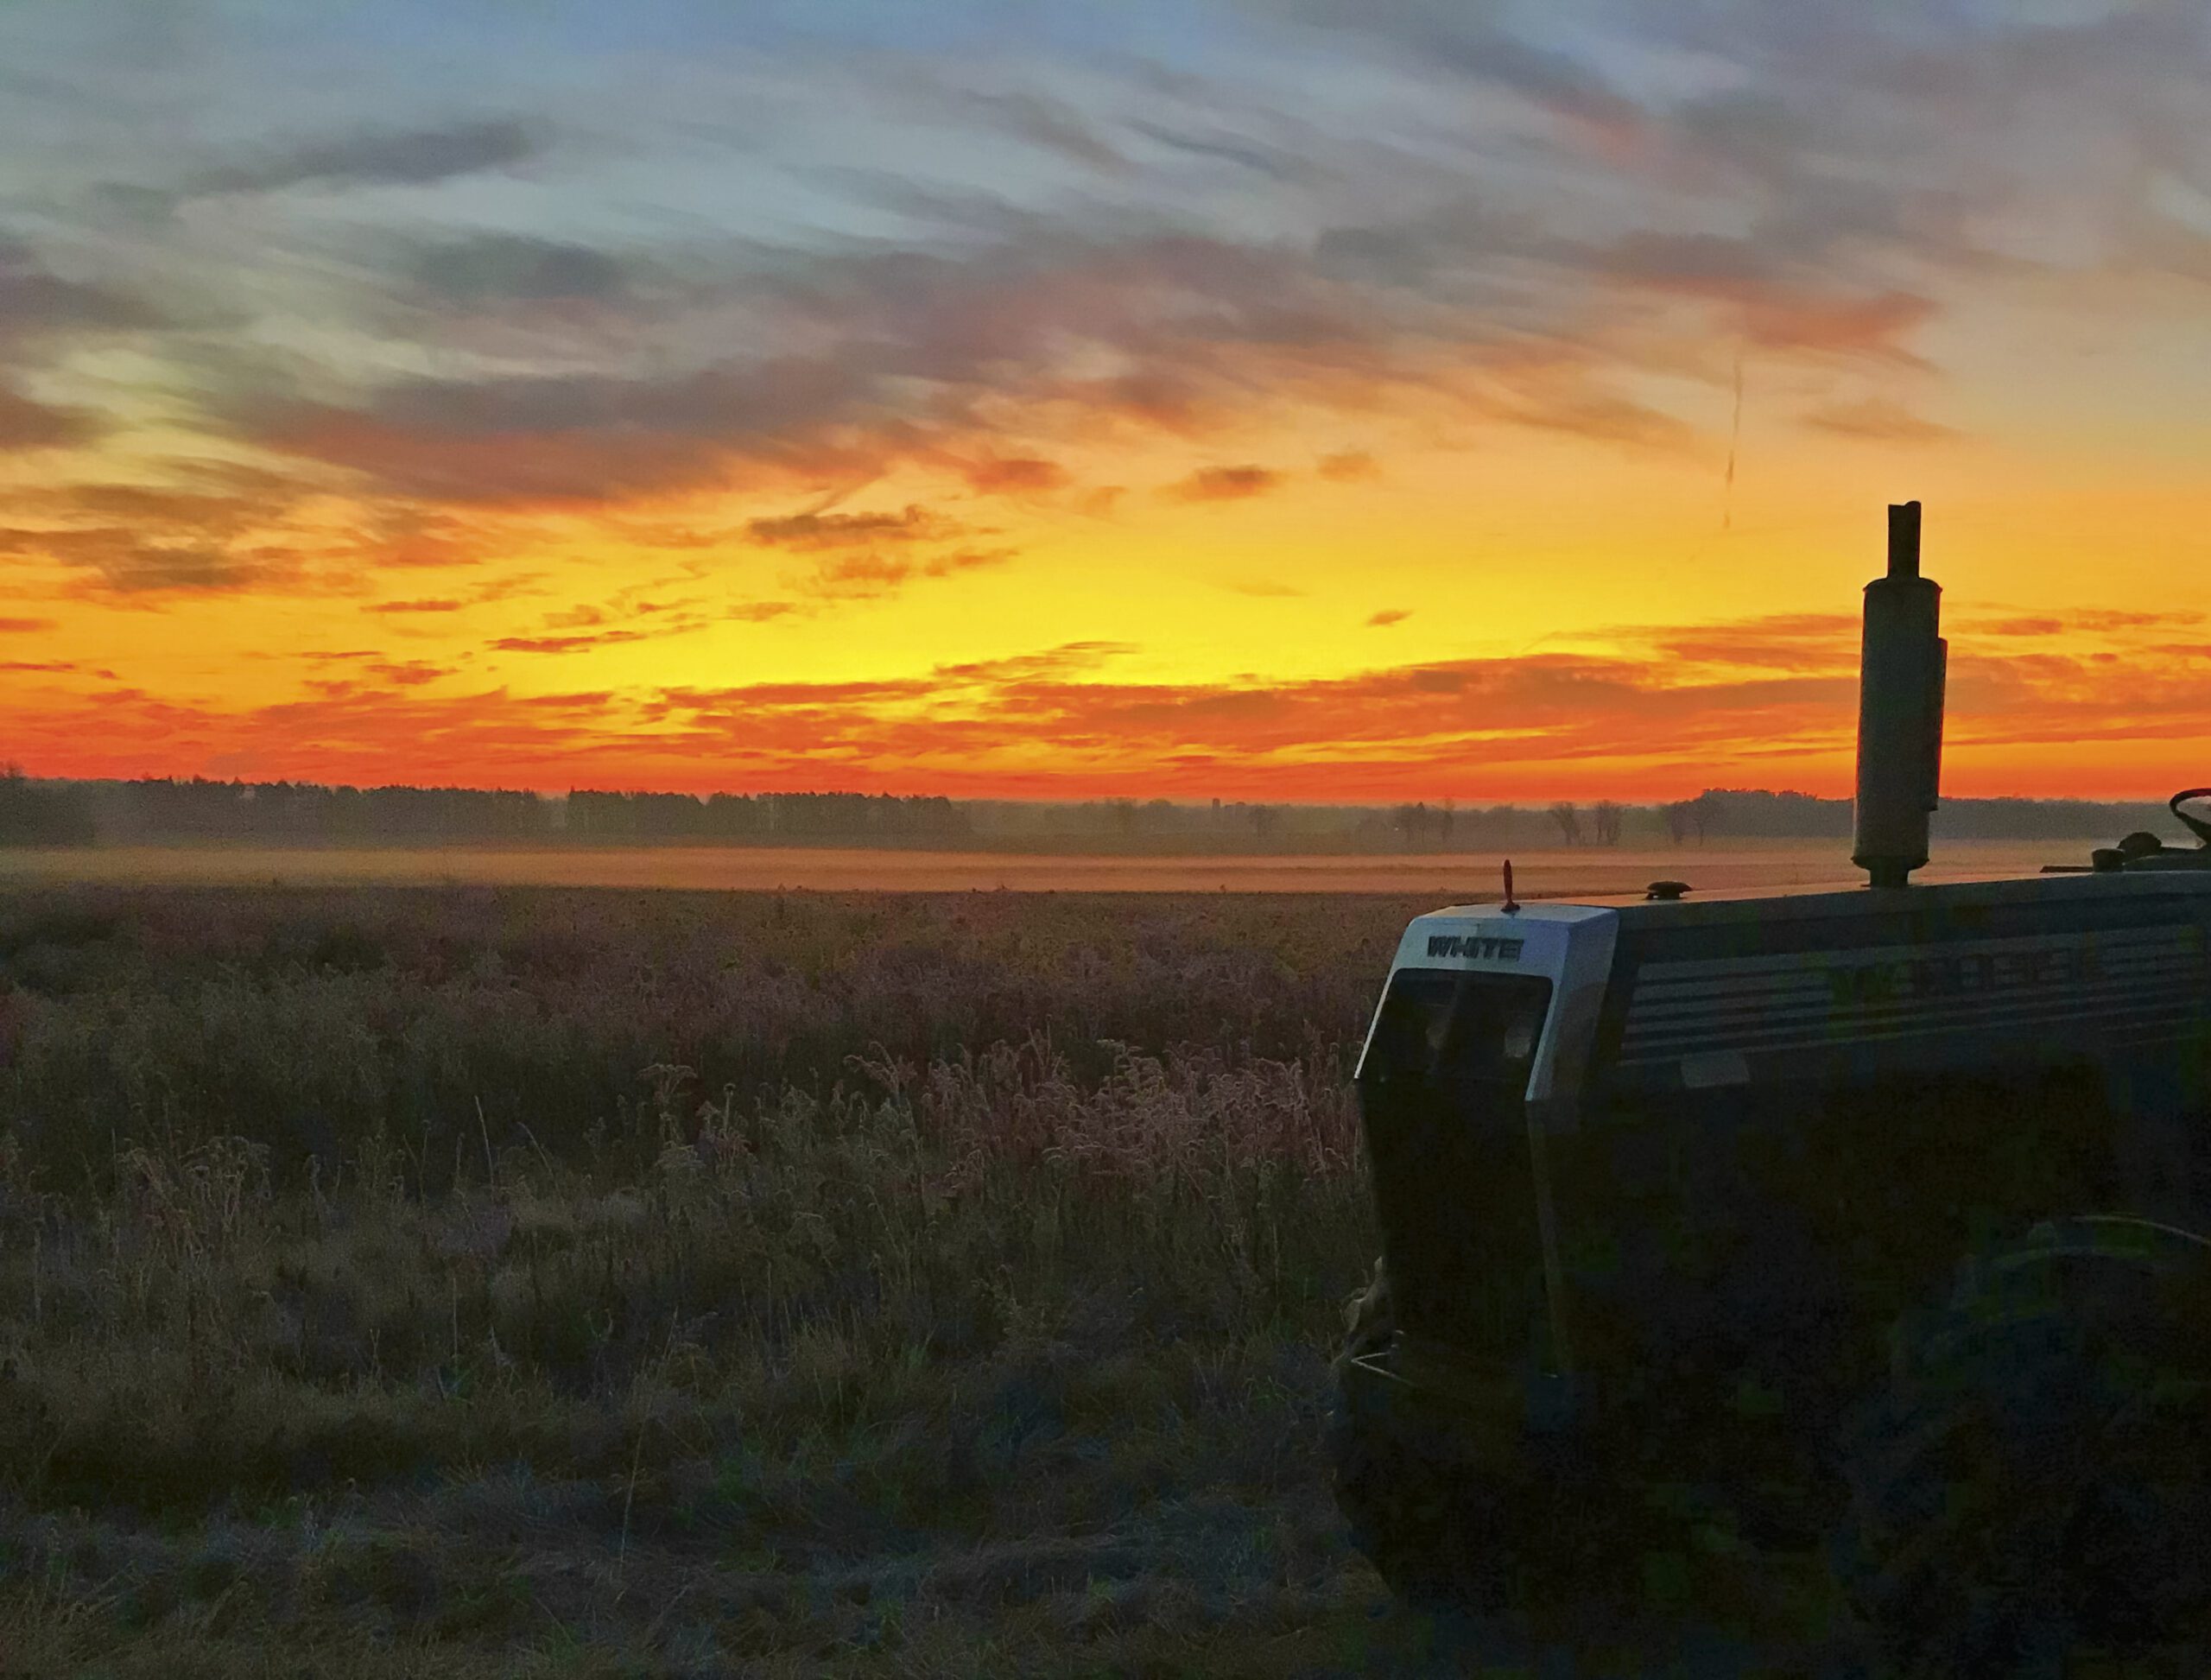 An idle tractor sits in a field as sunrise turns the skies vibrant colors of red, orange, and blue